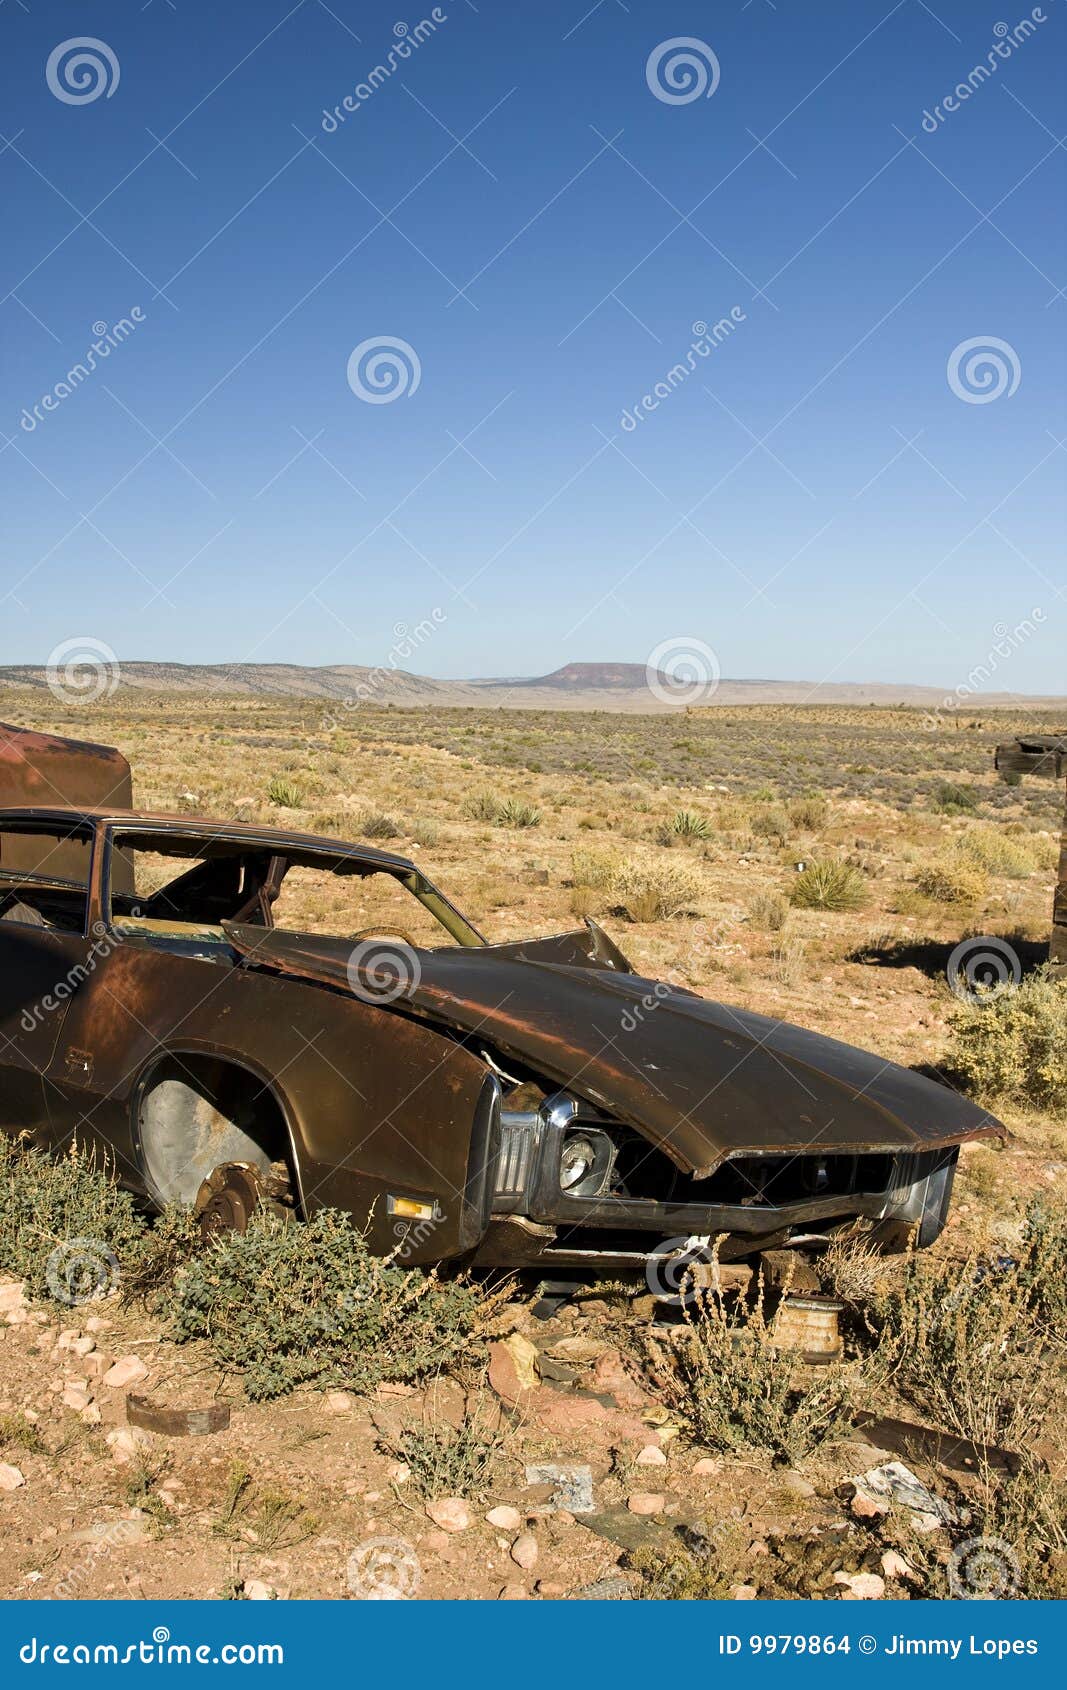 Auto Parts Store in the Middle of the Desert in Summer Season. Old  Automobiles, Car Wreckages Stock Photo - Image of transport, destroyed:  197673686